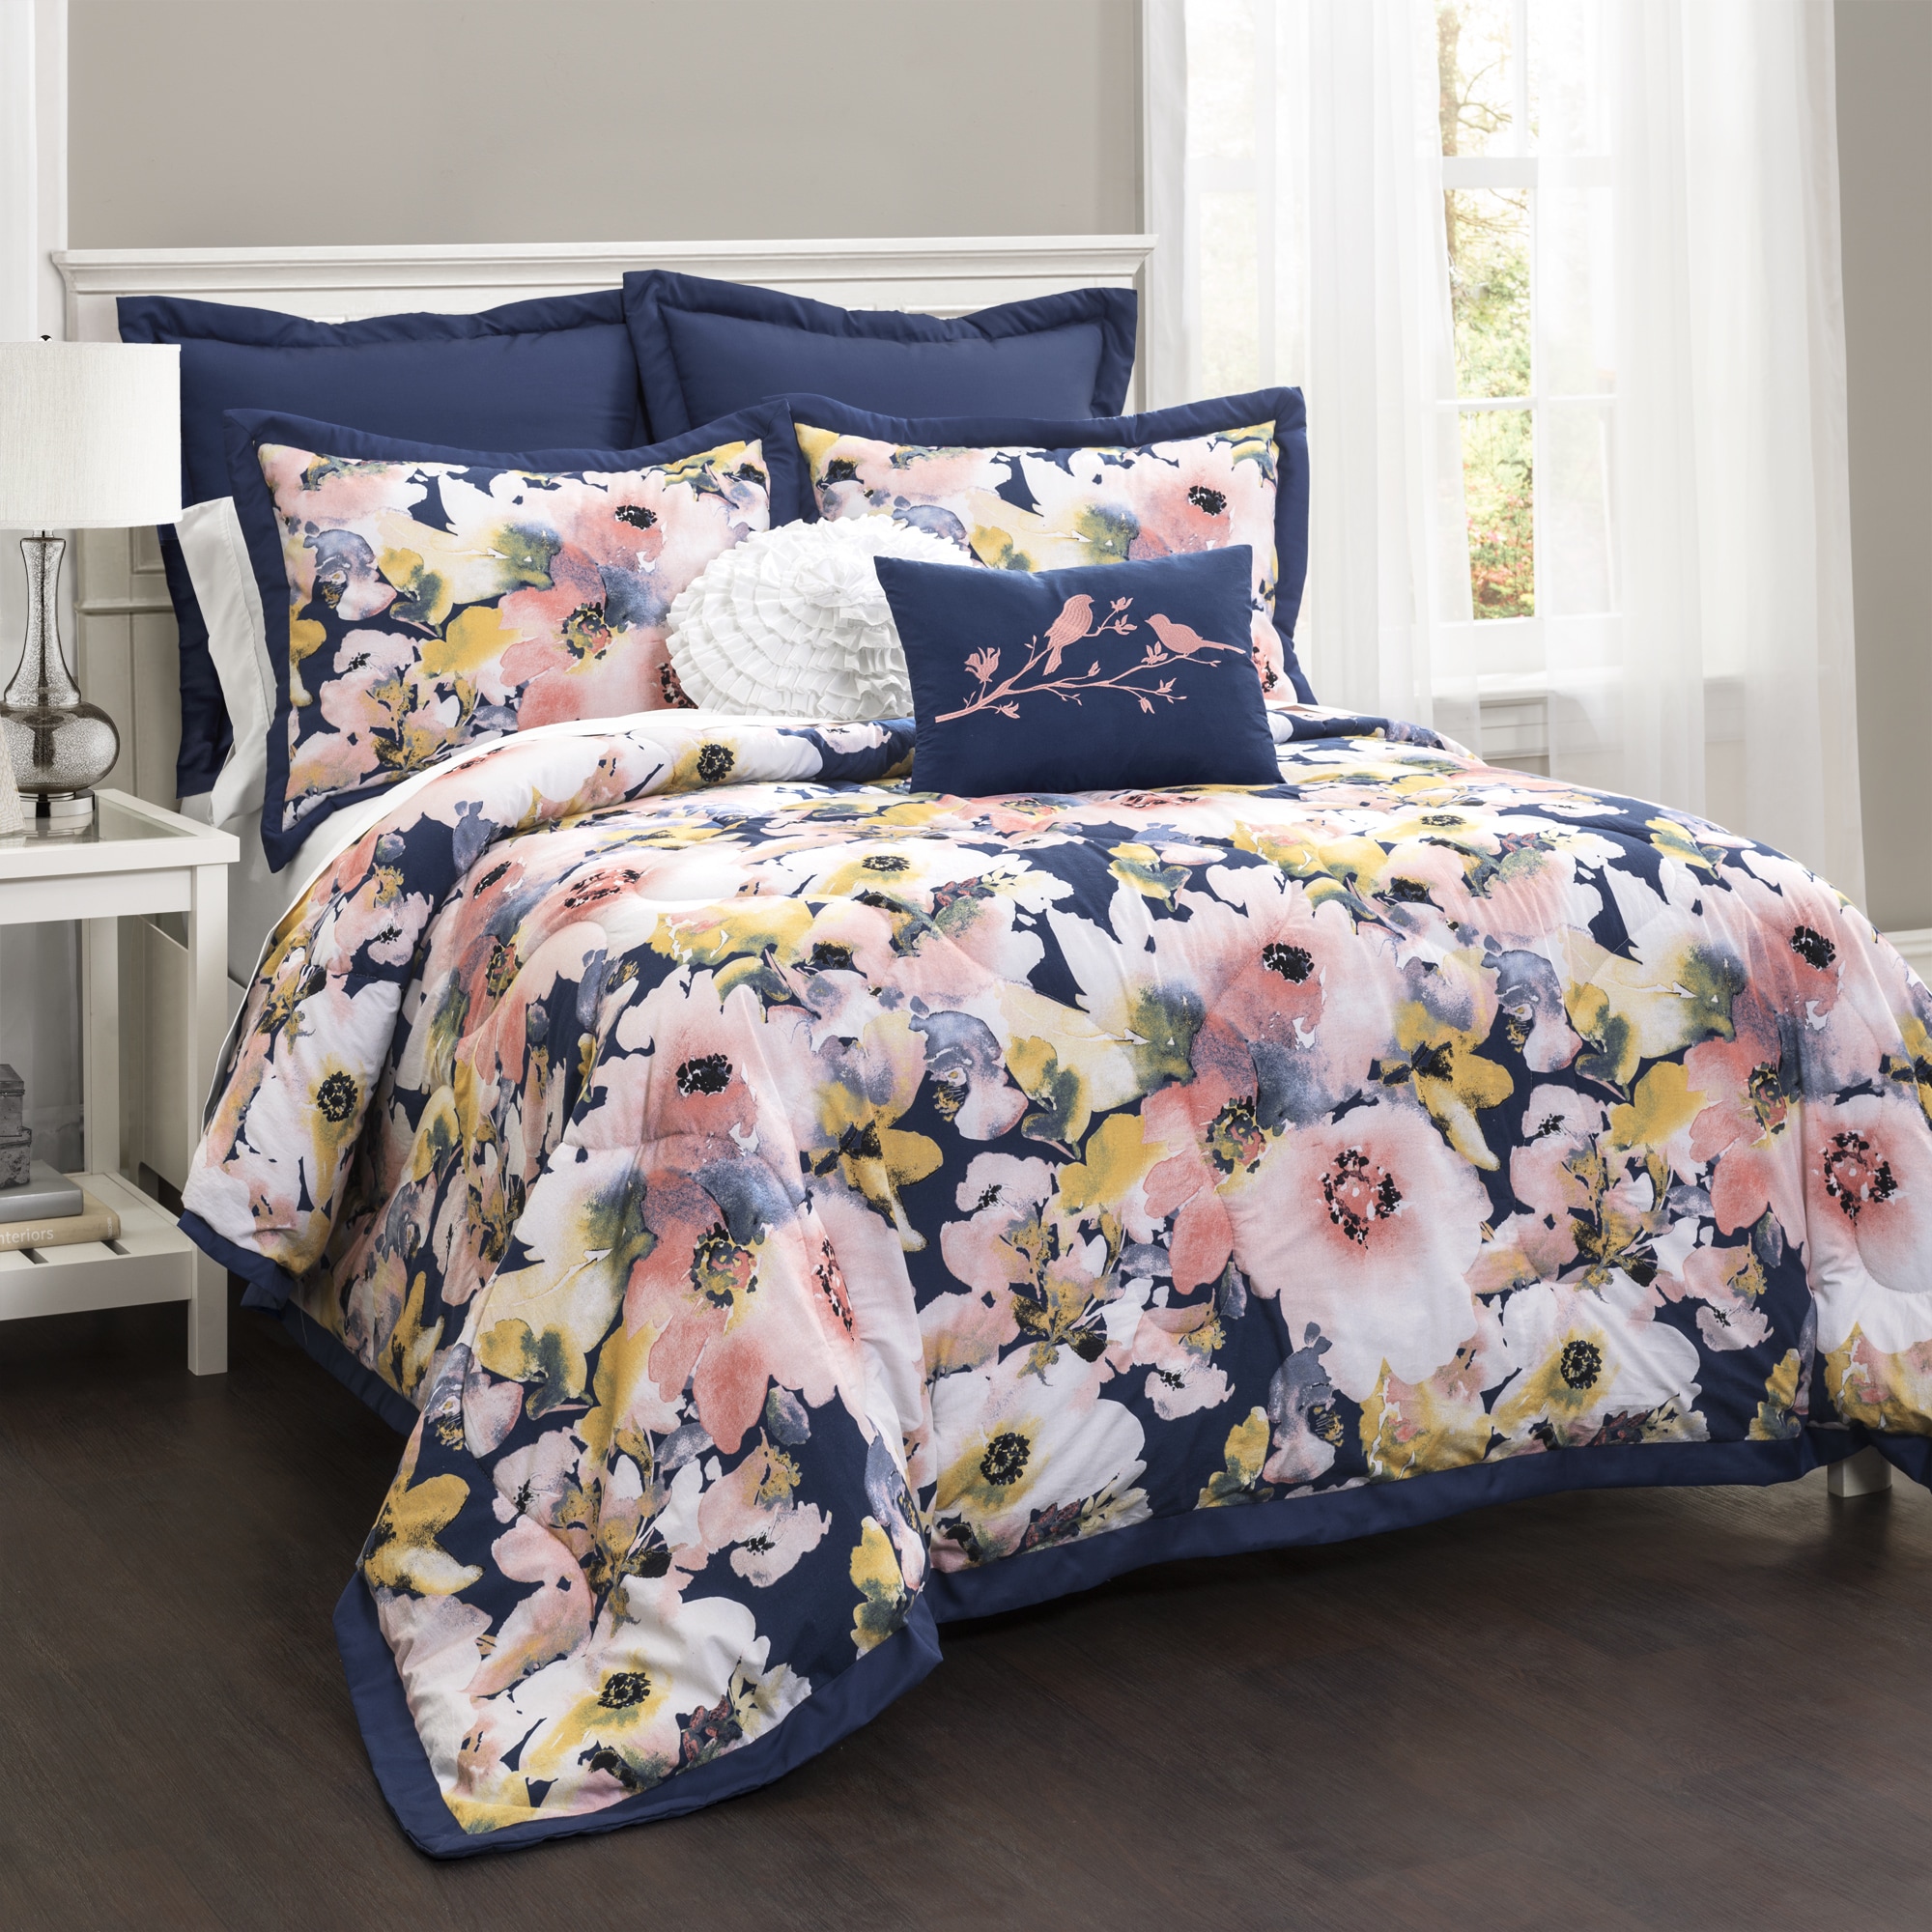 7 Piece Comforters and Sets - Bed Bath & Beyond